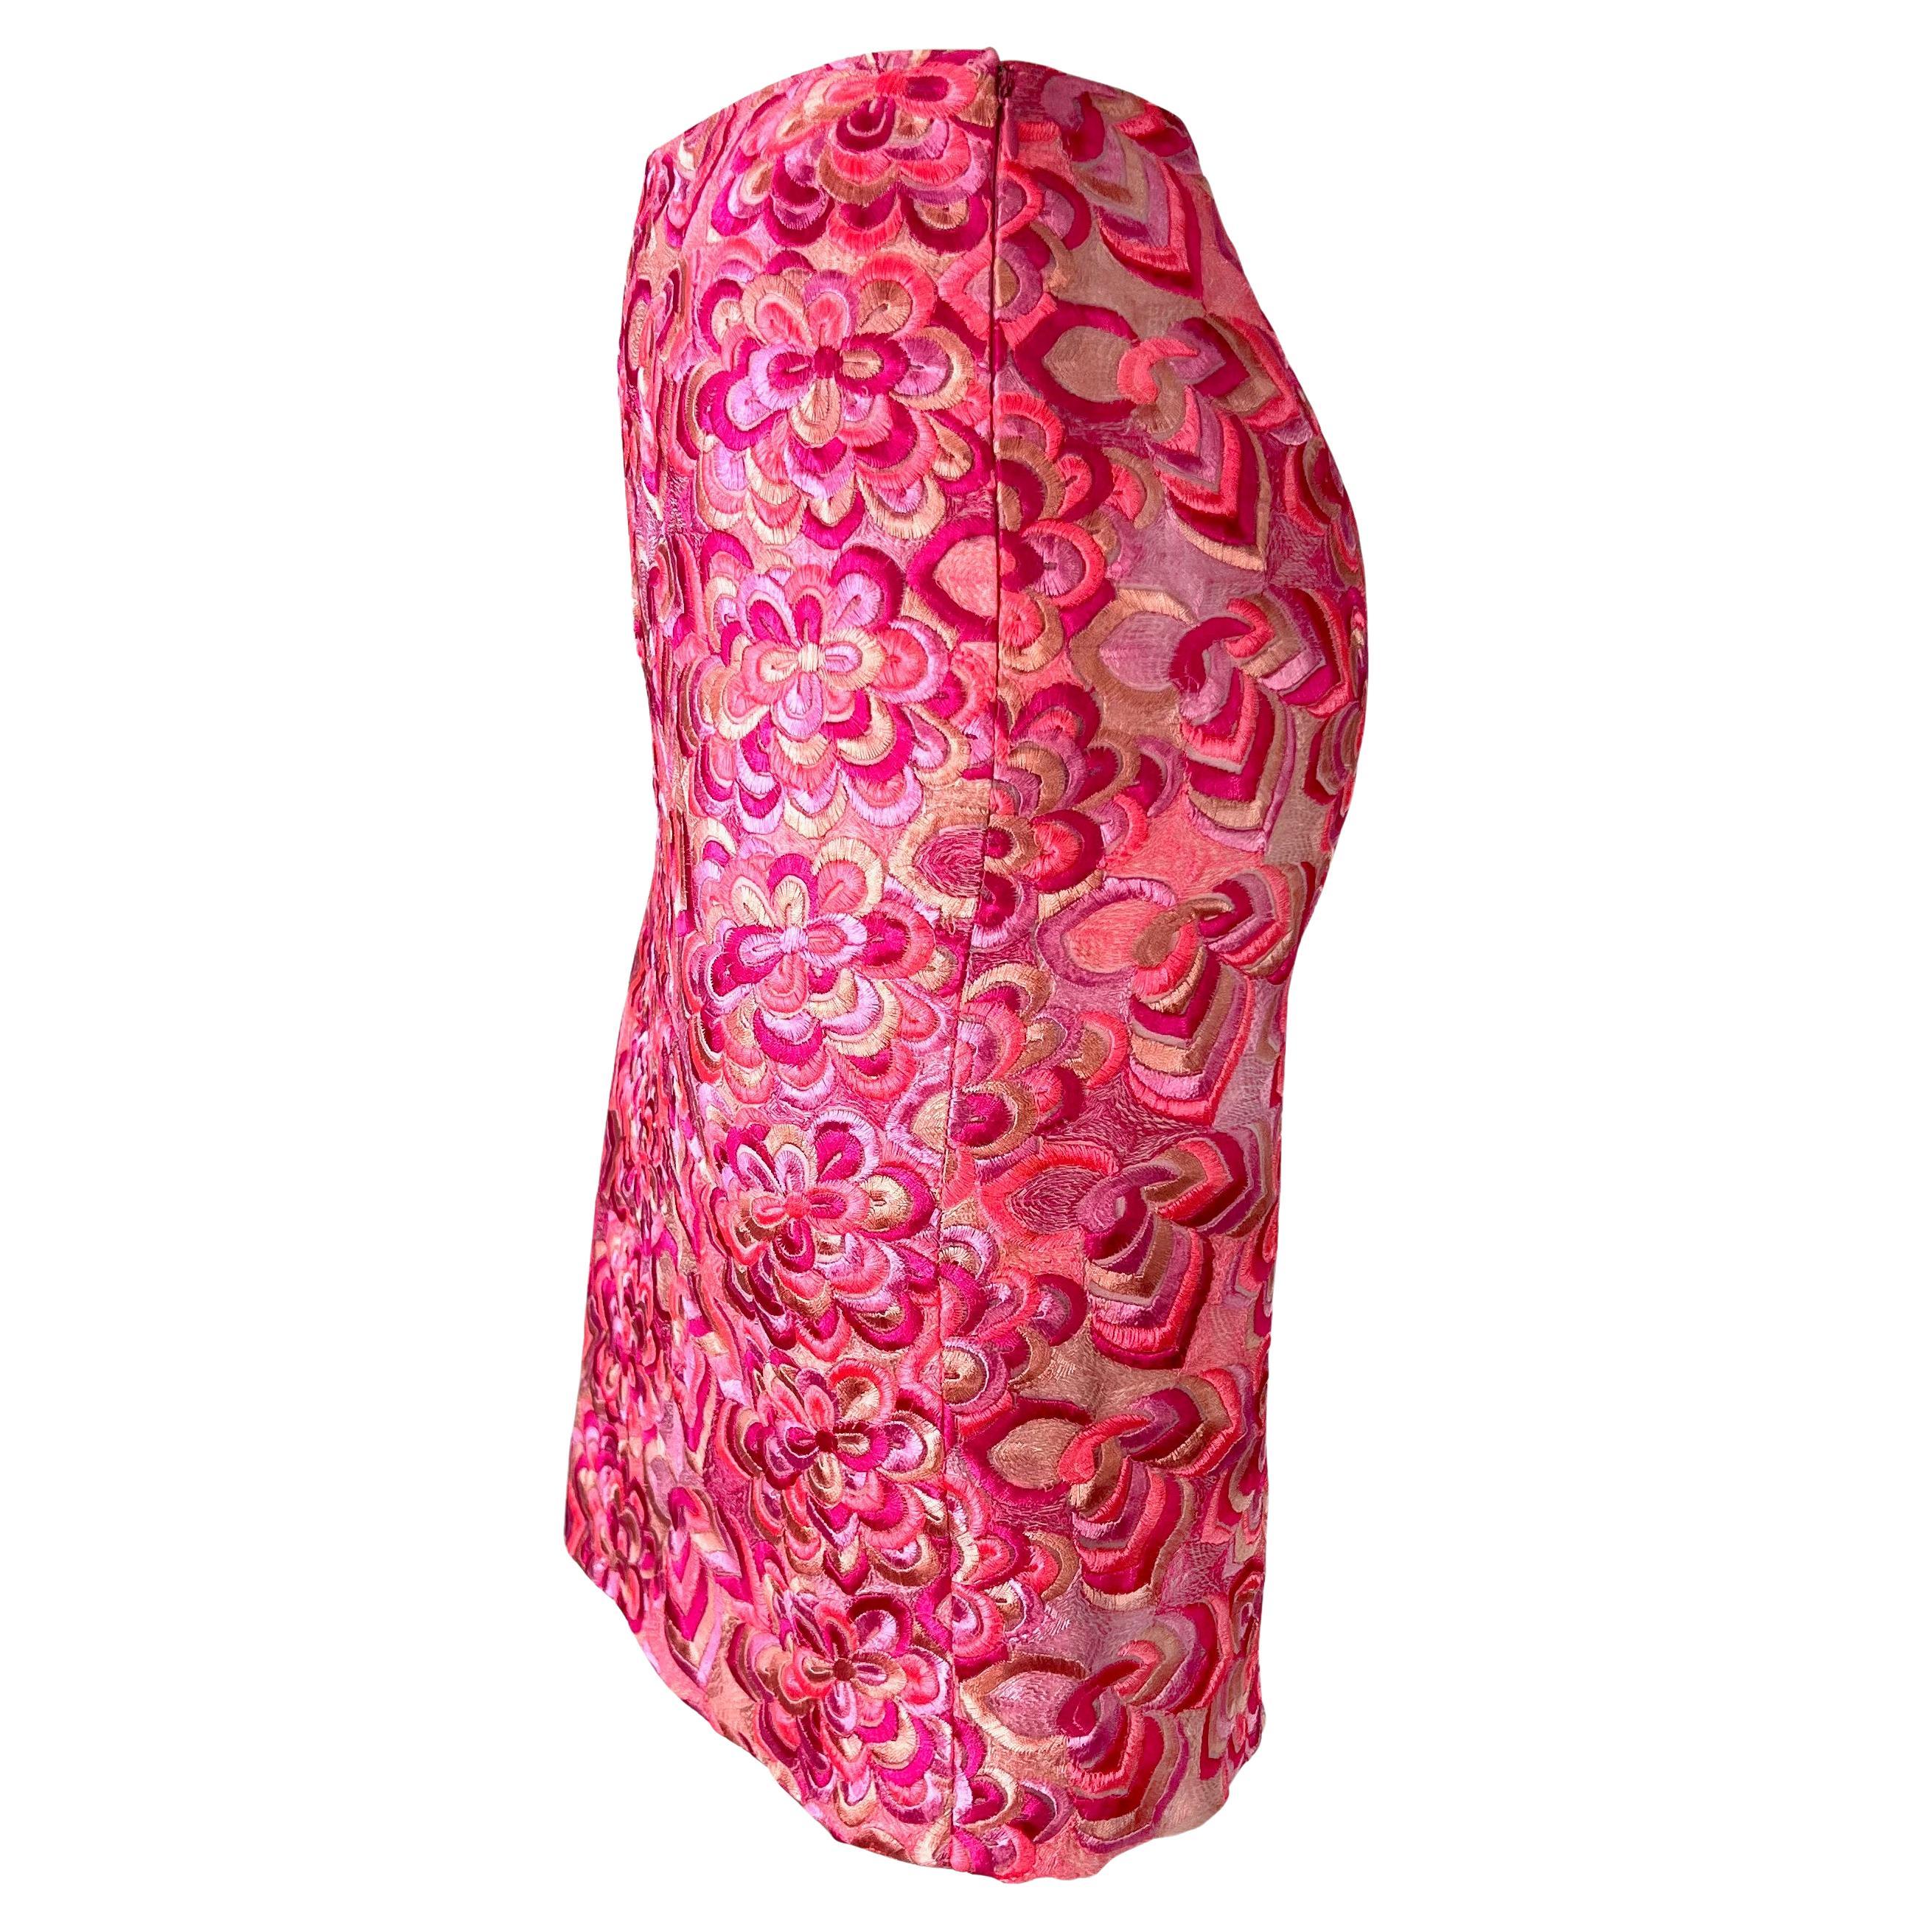 Rose S/S 2000 Gianni Versace by Donatella Versace for Gianni Versace for Gianni Versace for Gianni Versace for Gianni Versace by Donatella Neon Pink Floral Embroidered Skirt en vente